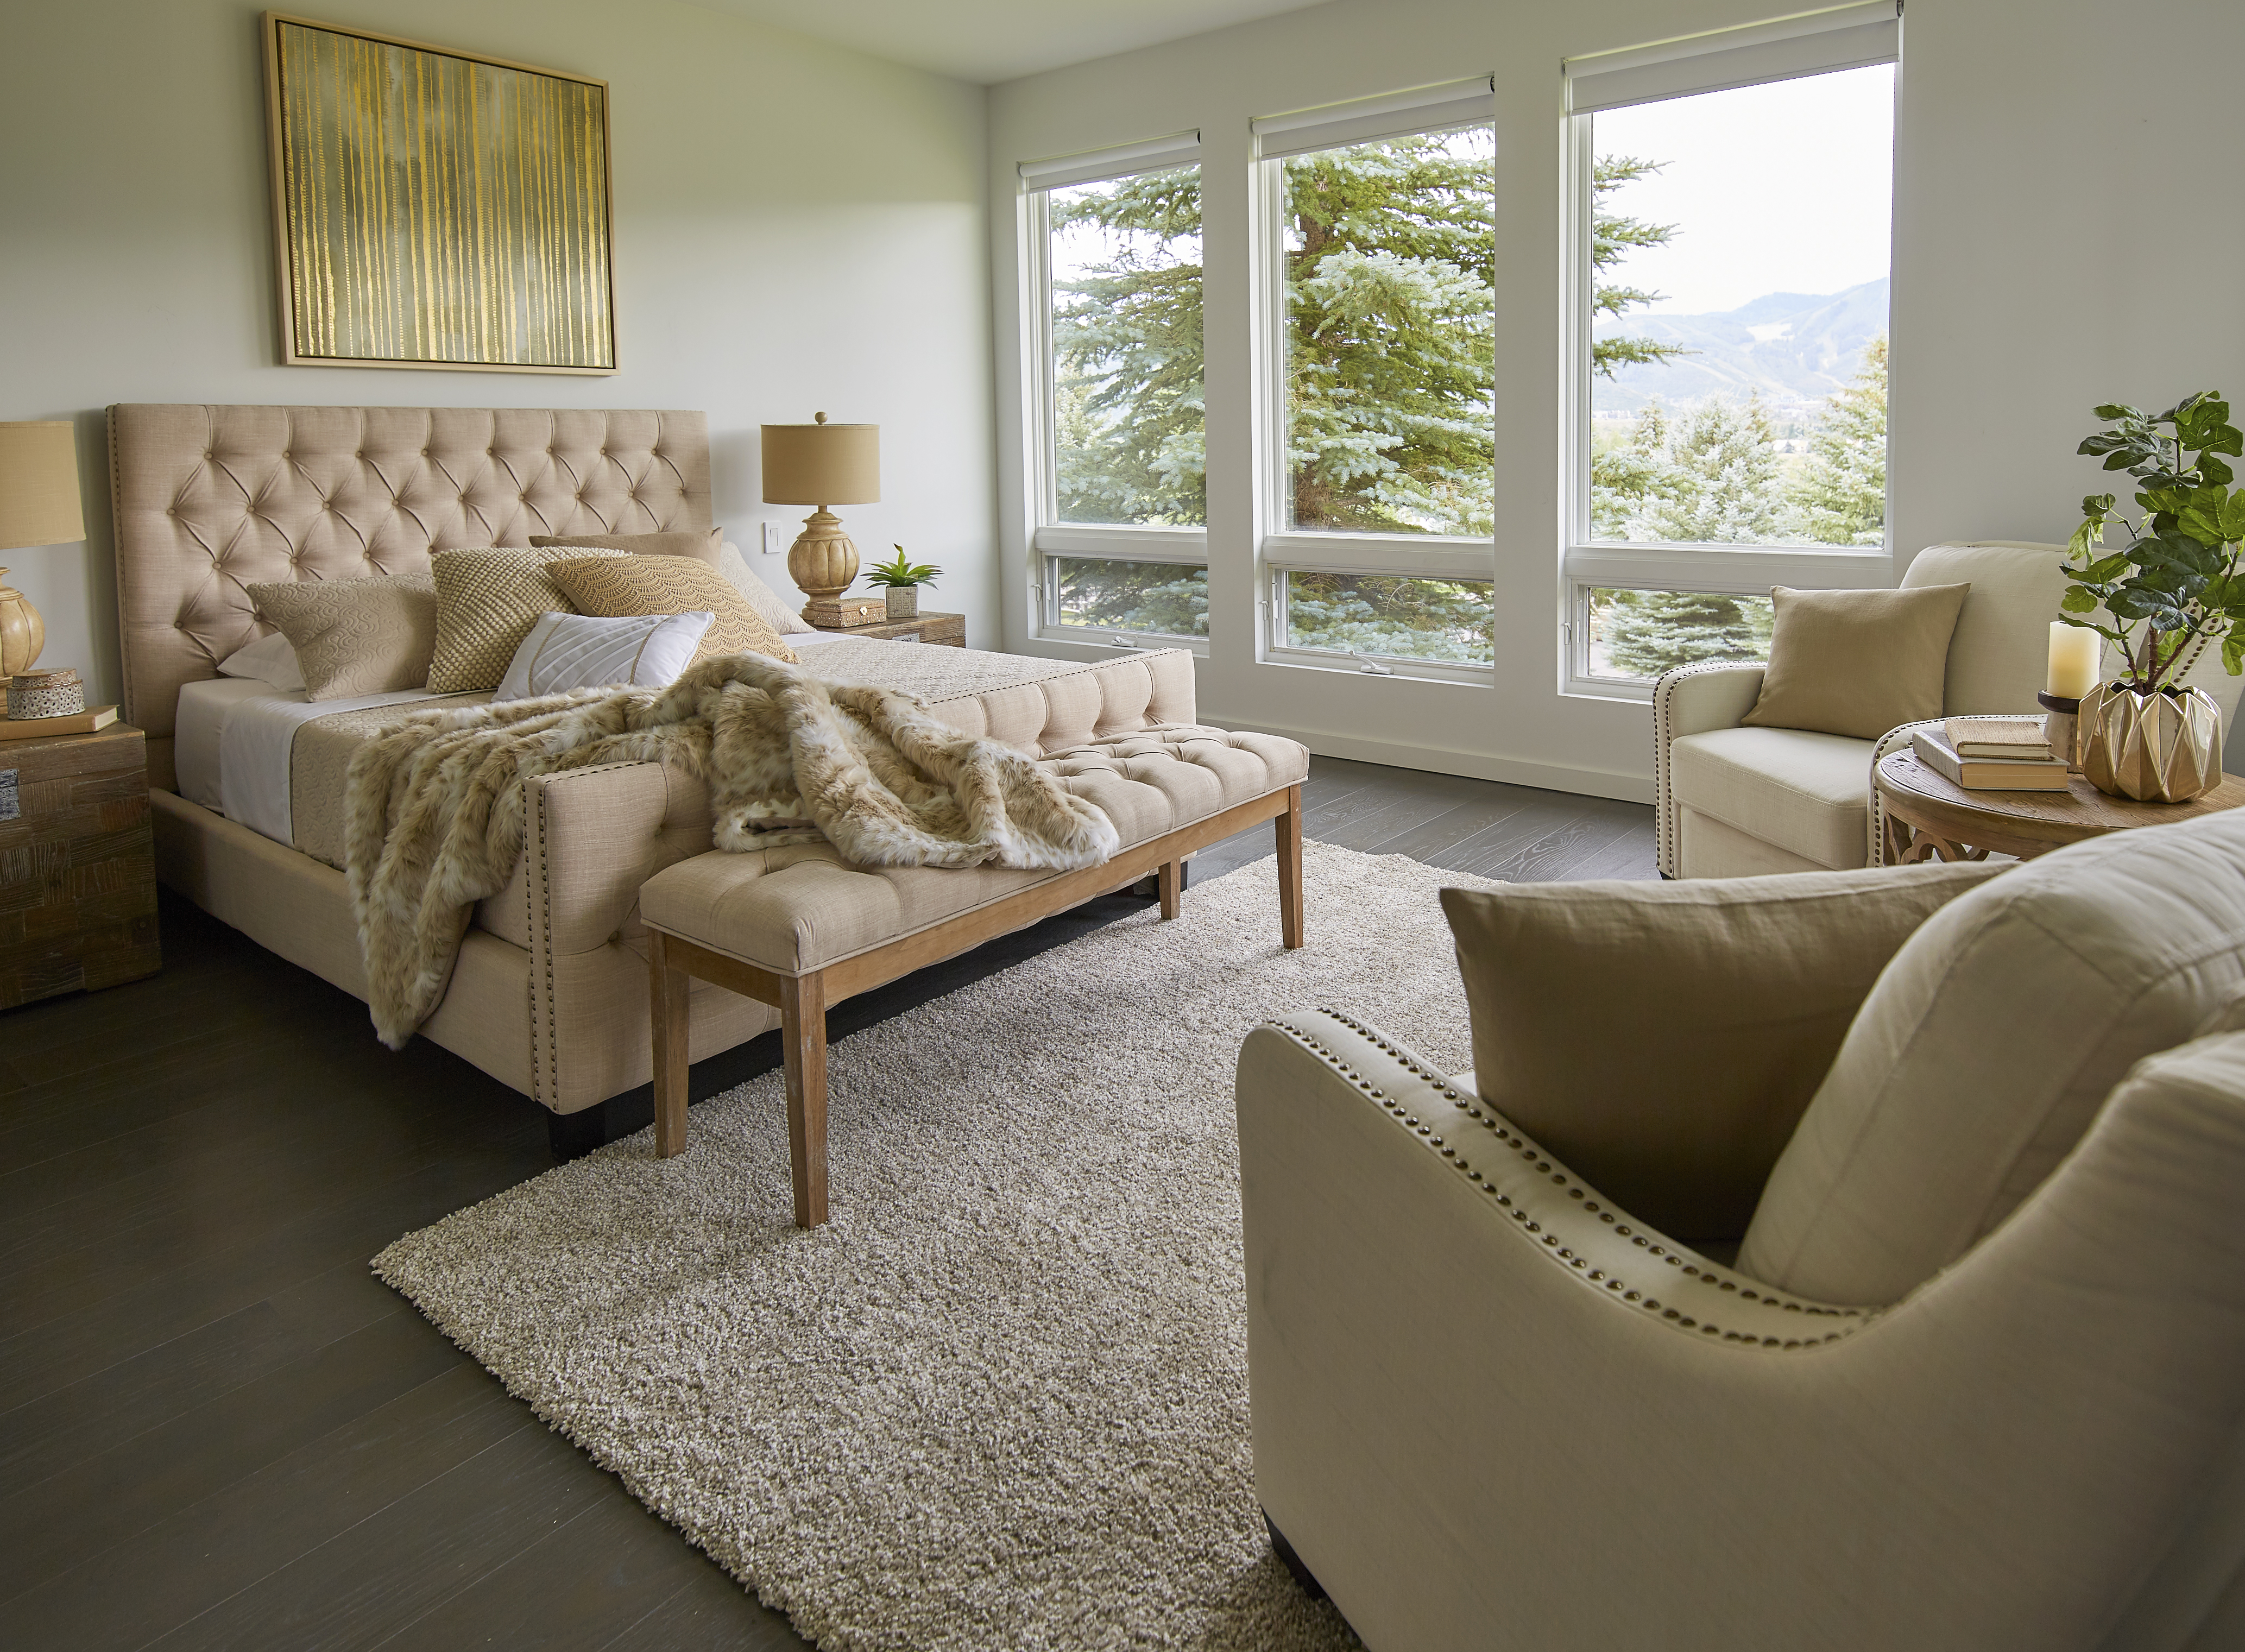 When looking at the different ways on how to make your guests feel right at home, it's all about delivering comfort. This image depicts just that with a Button Tufted Beige Linen Upholstered Bed, Button Tufted Beige Line Upholstered Bench, and two beige linen upholstered accent chairs.